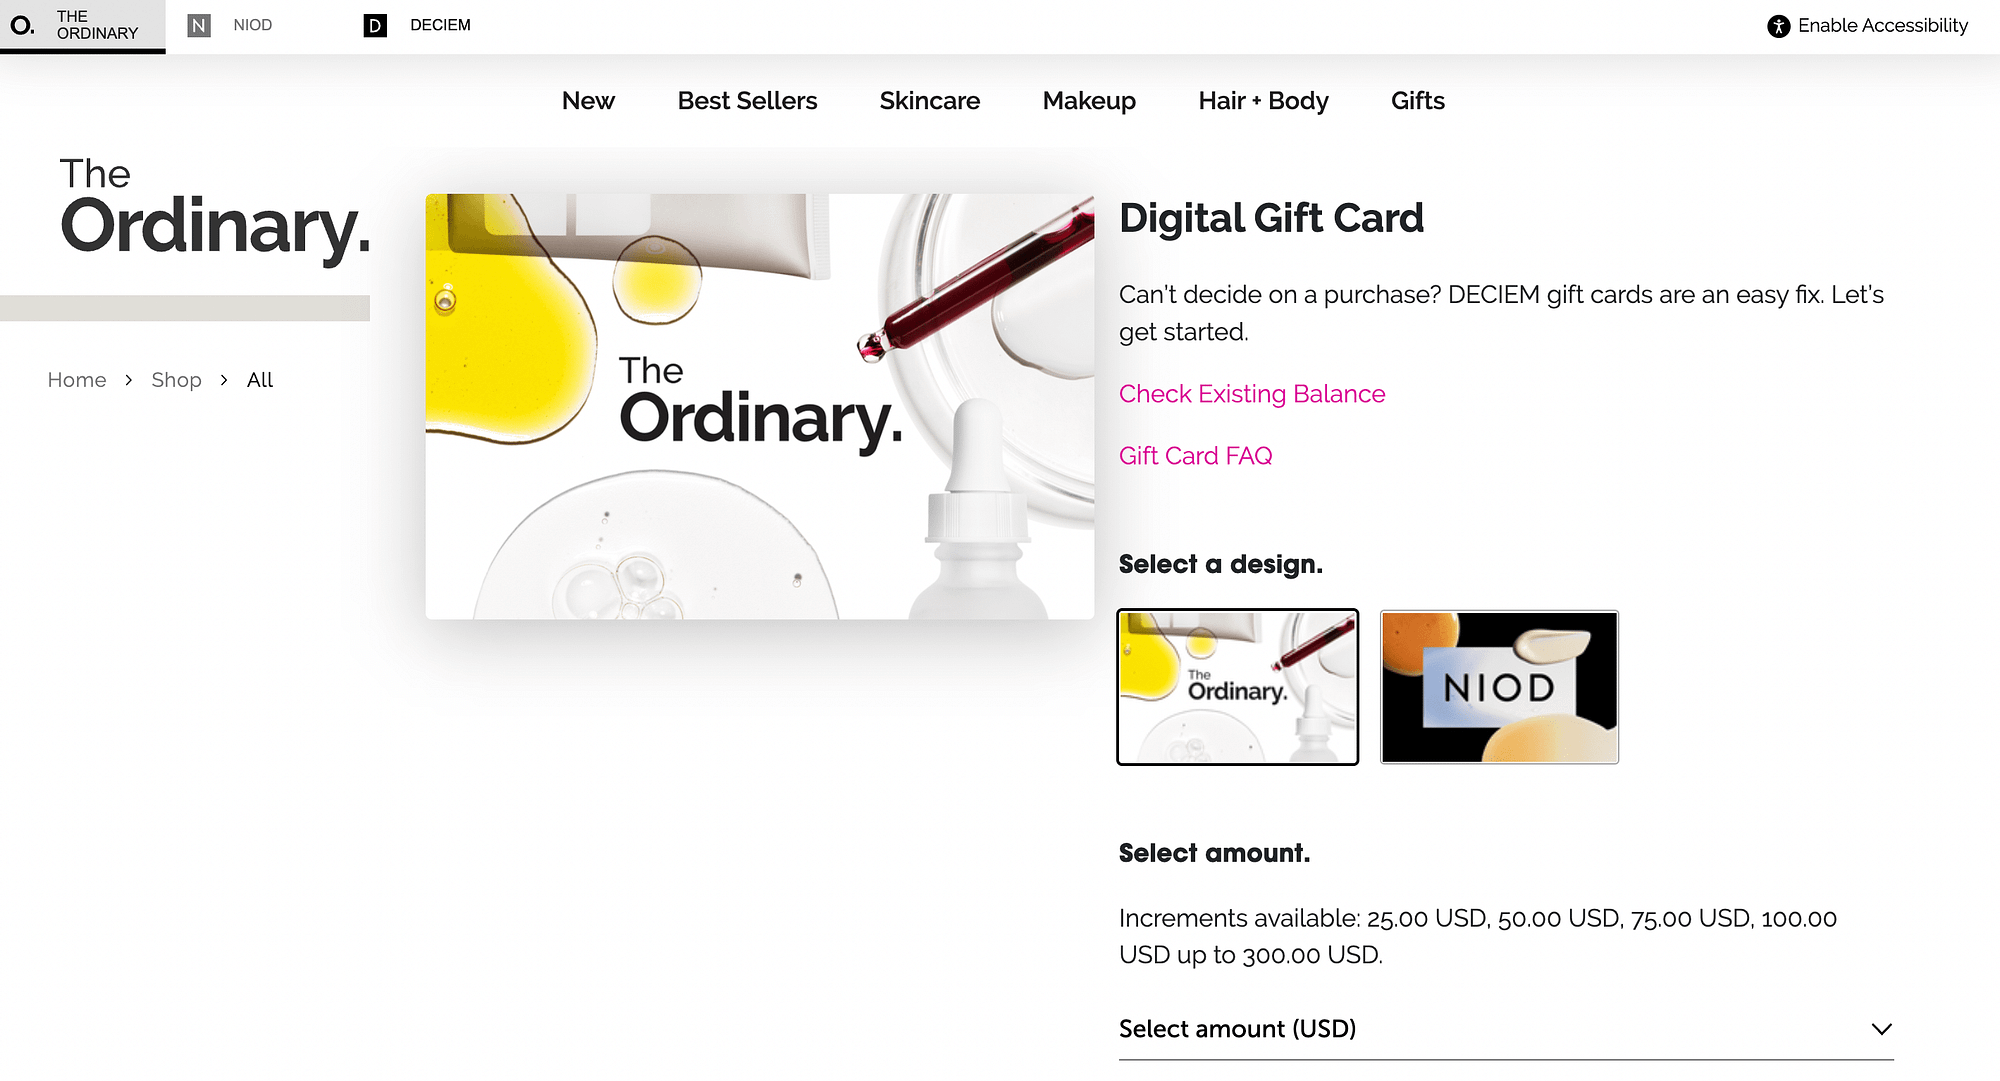 A digital gift card for The Ordinary.